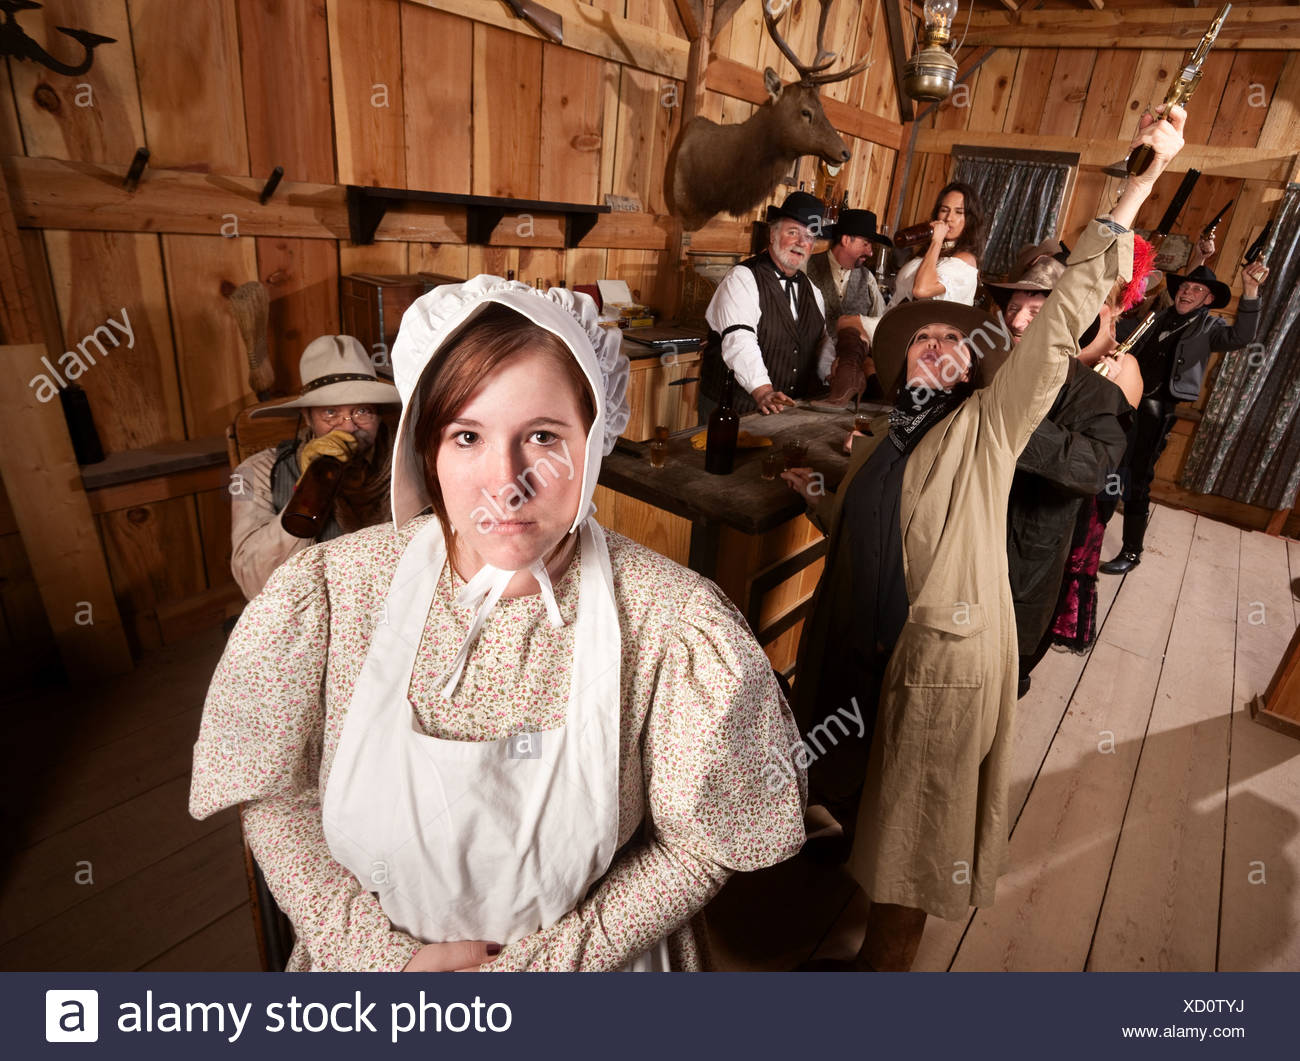 Shy woman with rowdy people in an old west saloon Stock Photo - Alamy